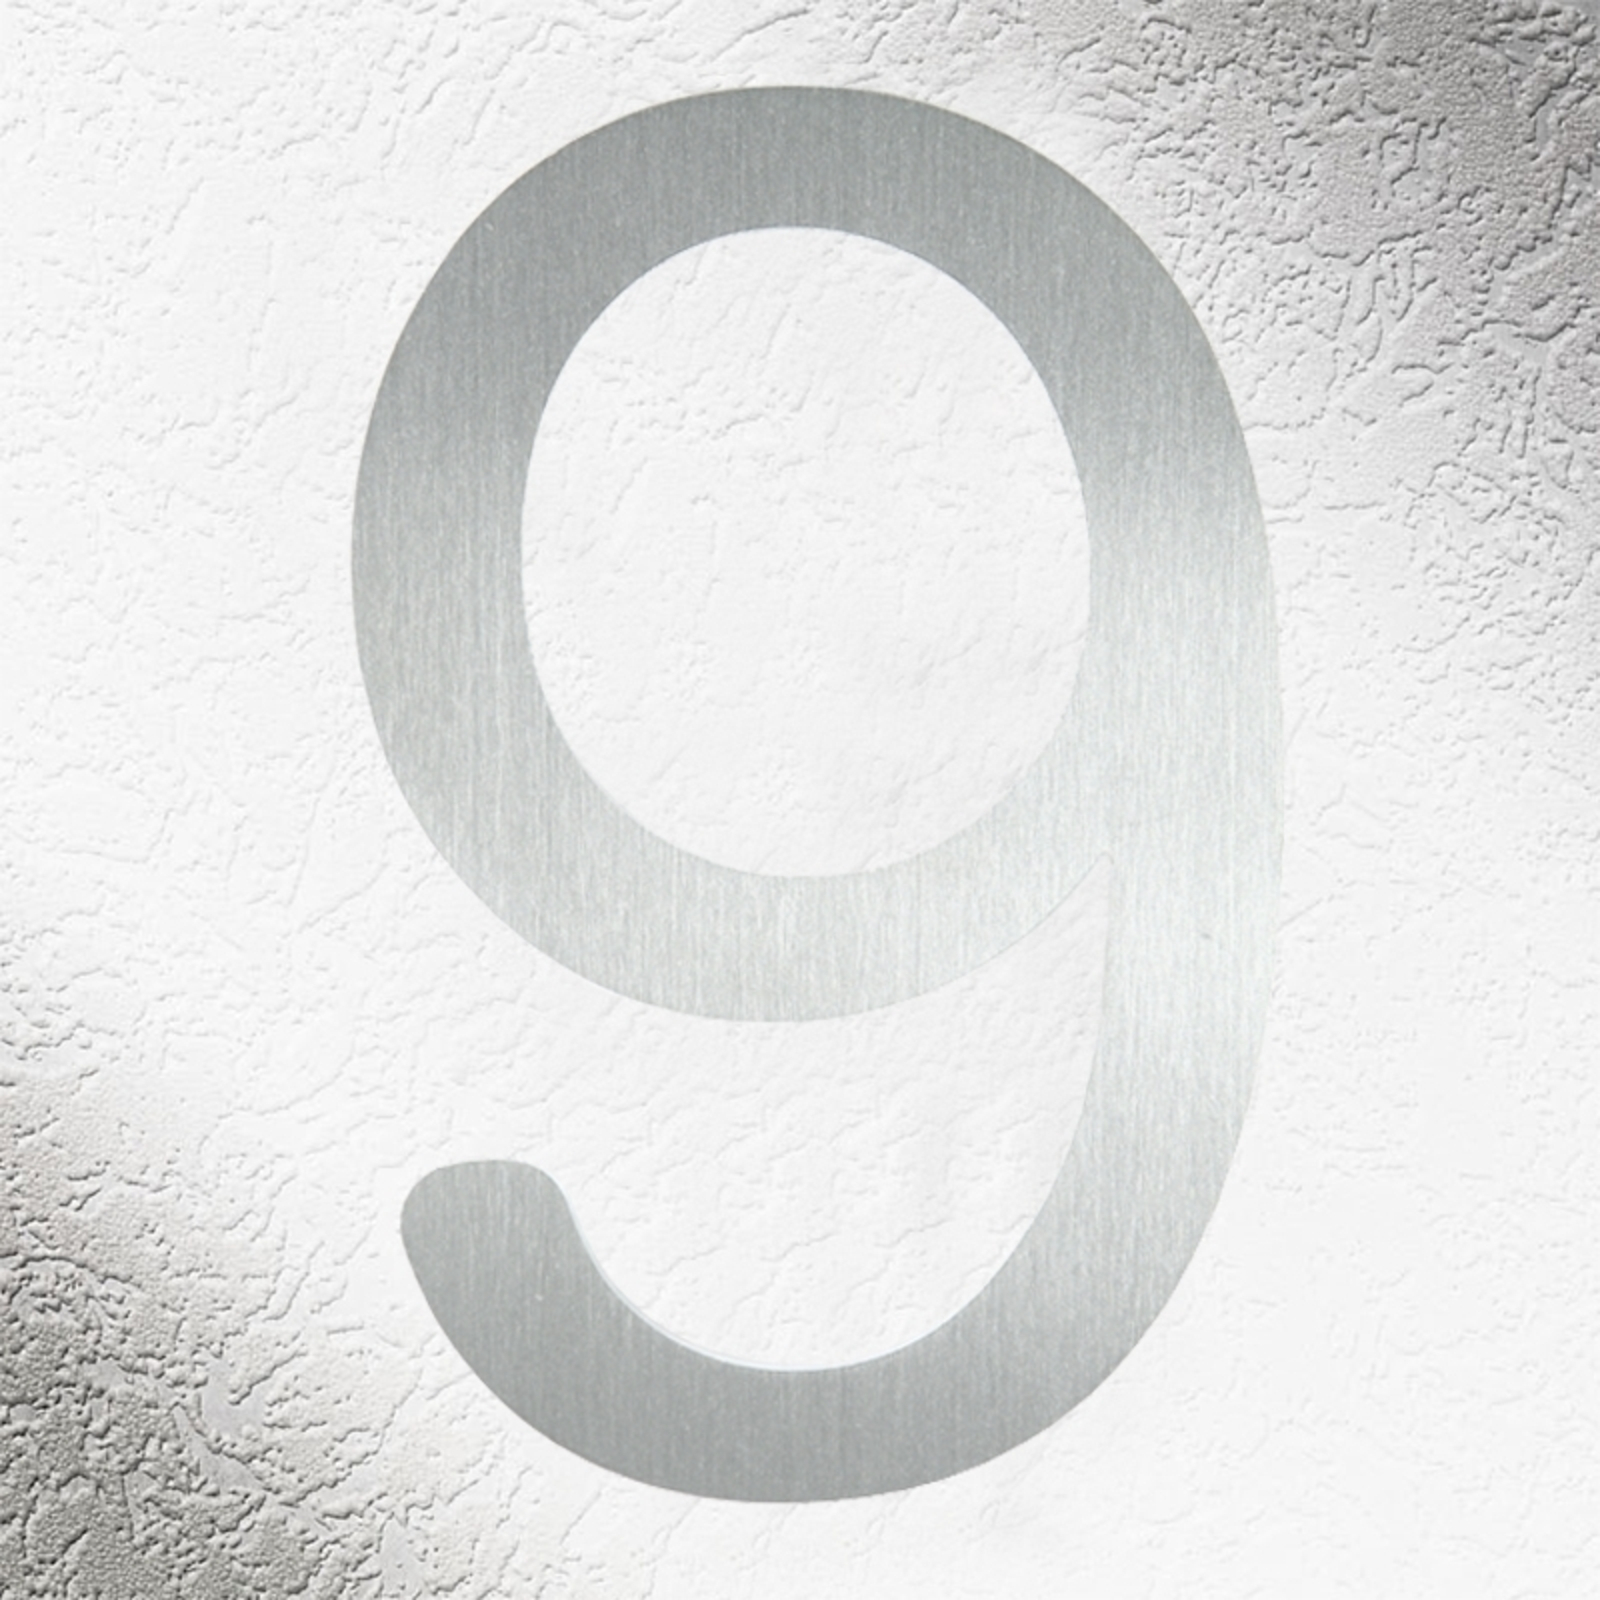 High Quality House Numbers made of Stainless 9